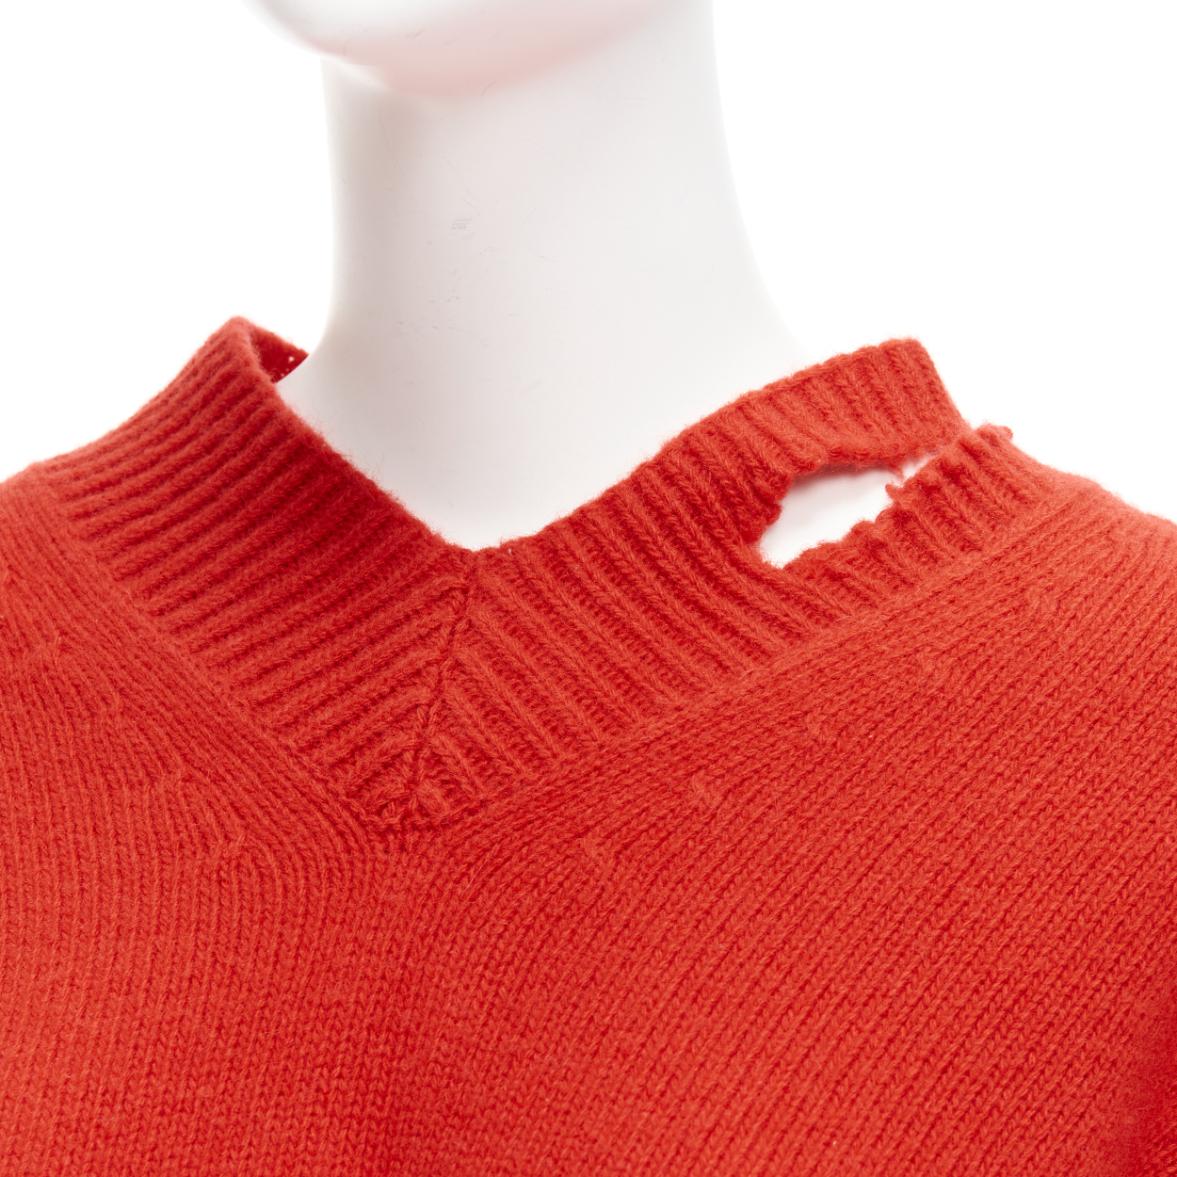 OLD CELINE Phoebe Philo red 100% wool distressed cut out cropped sweater M
Reference: TGAS/D01126
Brand: Celine
Designer: Phoebe Philo
Material: Wool
Color: Red
Pattern: Solid
Closure: Pullover
Made in: Italy

CONDITION:
Condition: Excellent, this